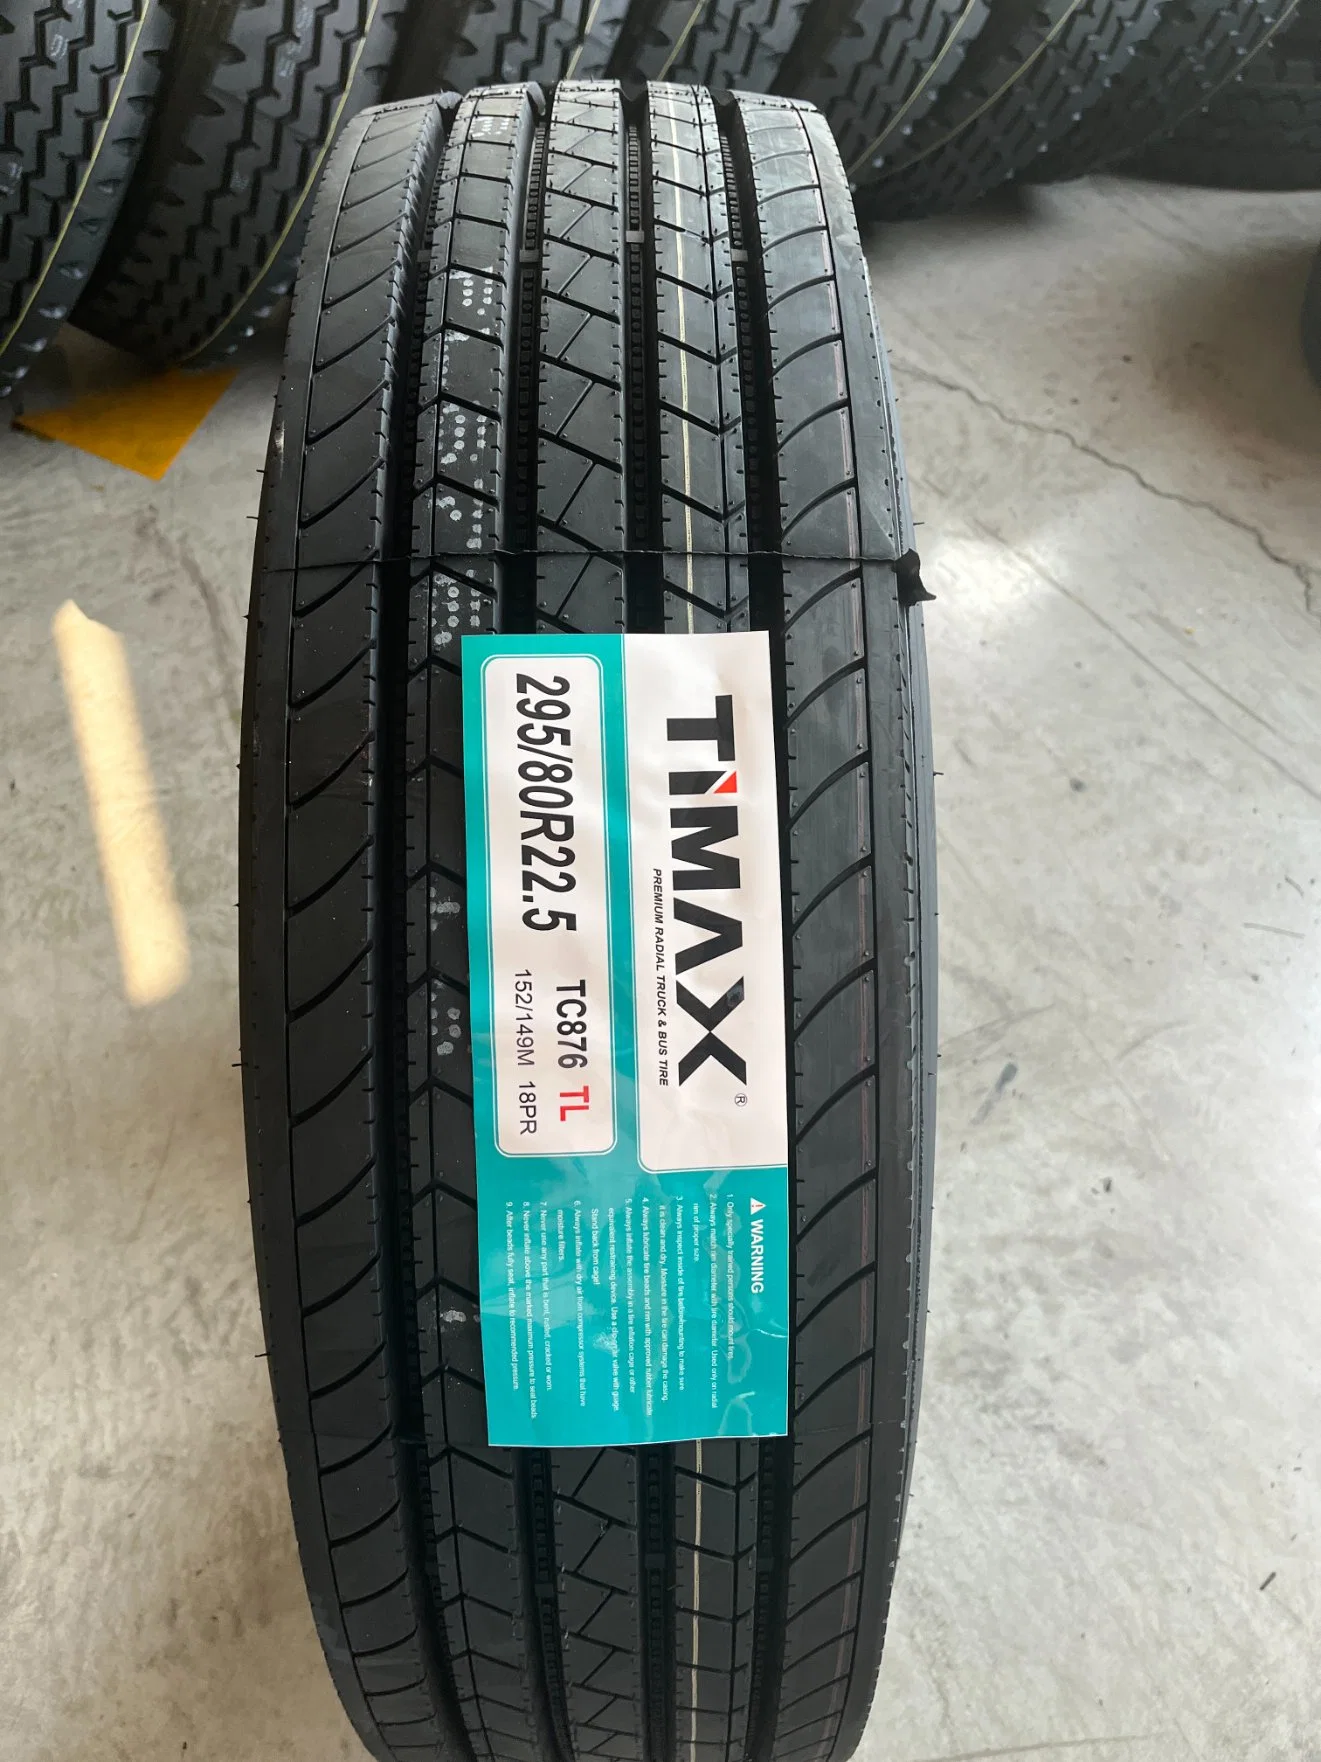 Top Brand Timax Radial Truck Tire with High-Quality 315/80r 22.5 295/80r22.5 Competitive Cheaper Price Hot Sale Bus Tire OTR TBR 1200r20 1100r20